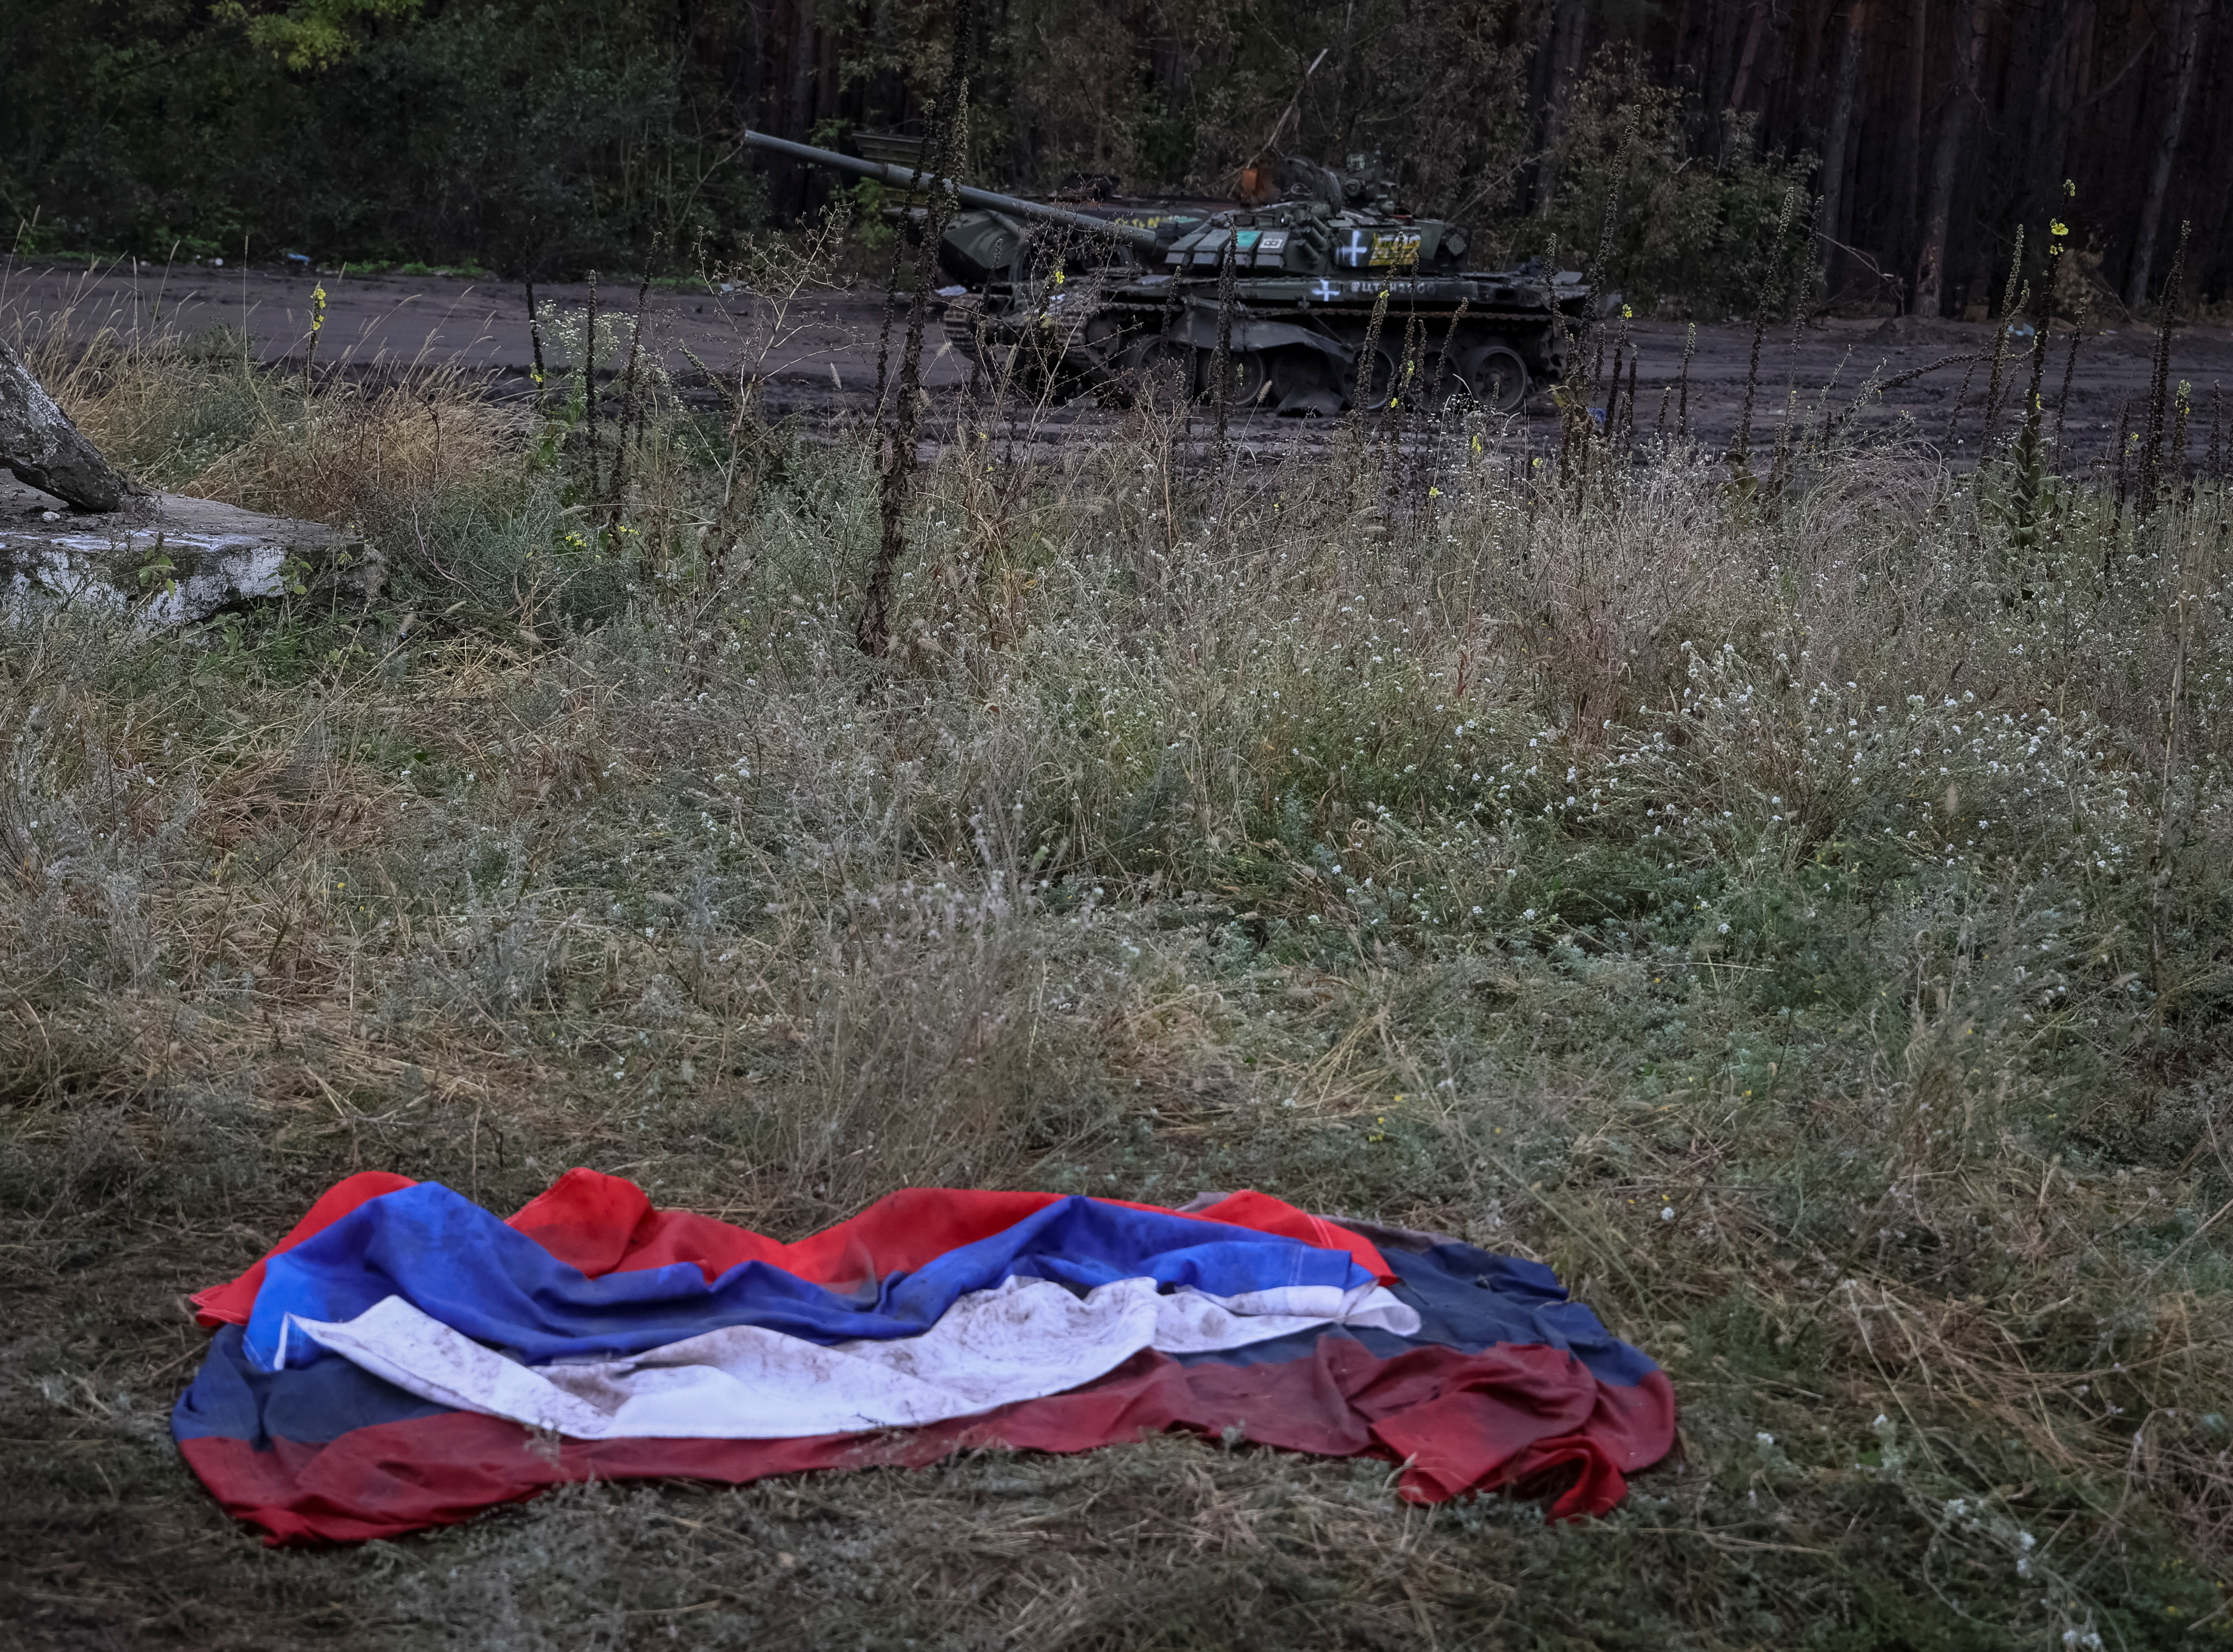 The Russian flag was abandoned after the Ukrainian offensive in Kharkiv